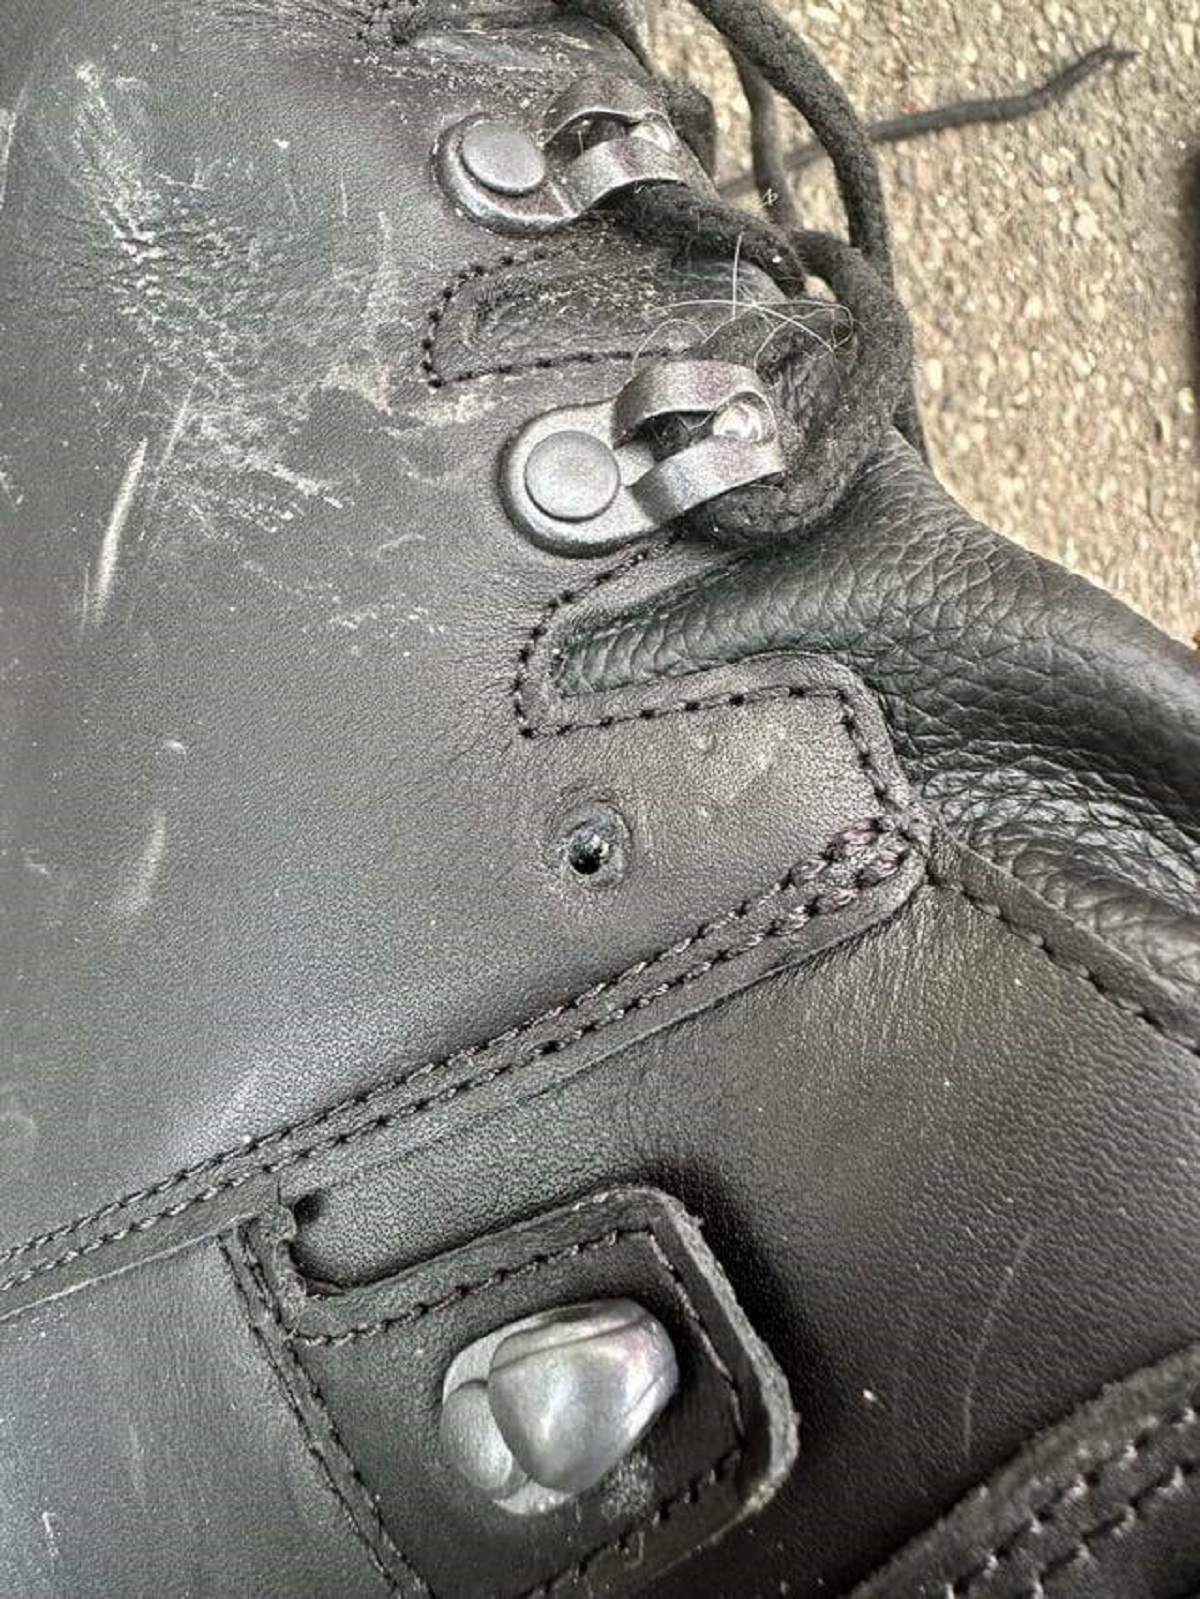 "Second time wearing my 369€ hiking boots and they are already broken…"